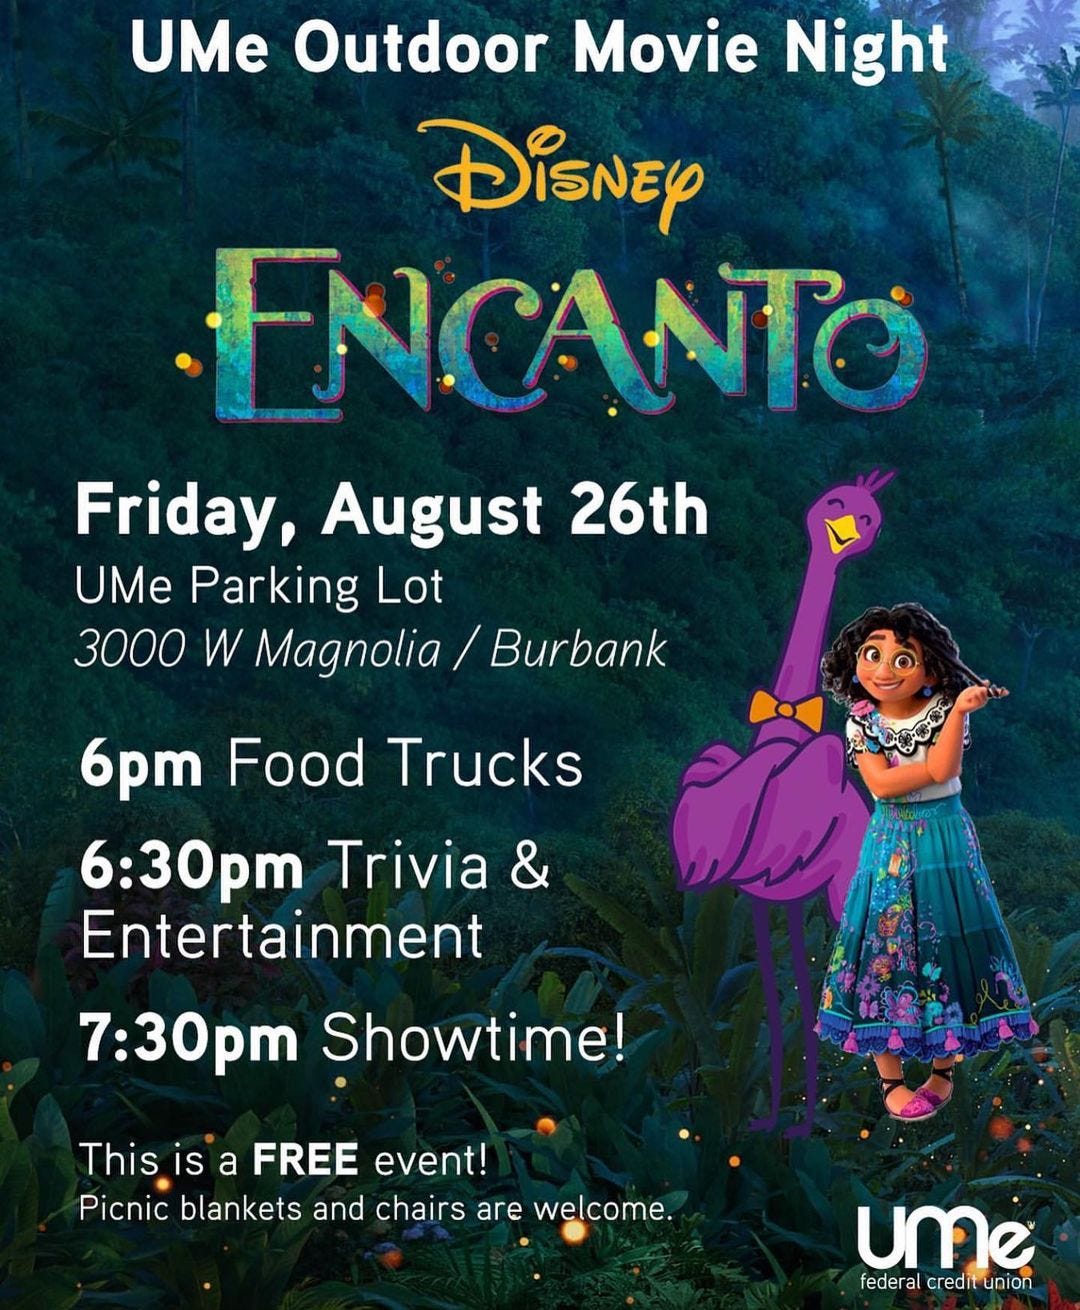 May be an image of ‎1 person, outdoors and ‎text that says '‎UMe Outdoor Movie Night DisnEy EN.CANTO Friday, August 26th UMe Parking Lot 3000 W Magnolia Burbank 6pm Food Trucks 6:30pm Trivia Entertainment 7:30pm Showtime! This is a FREE event! Picnic blankets and chairs are welcome. ume ۔ credit‎'‎‎